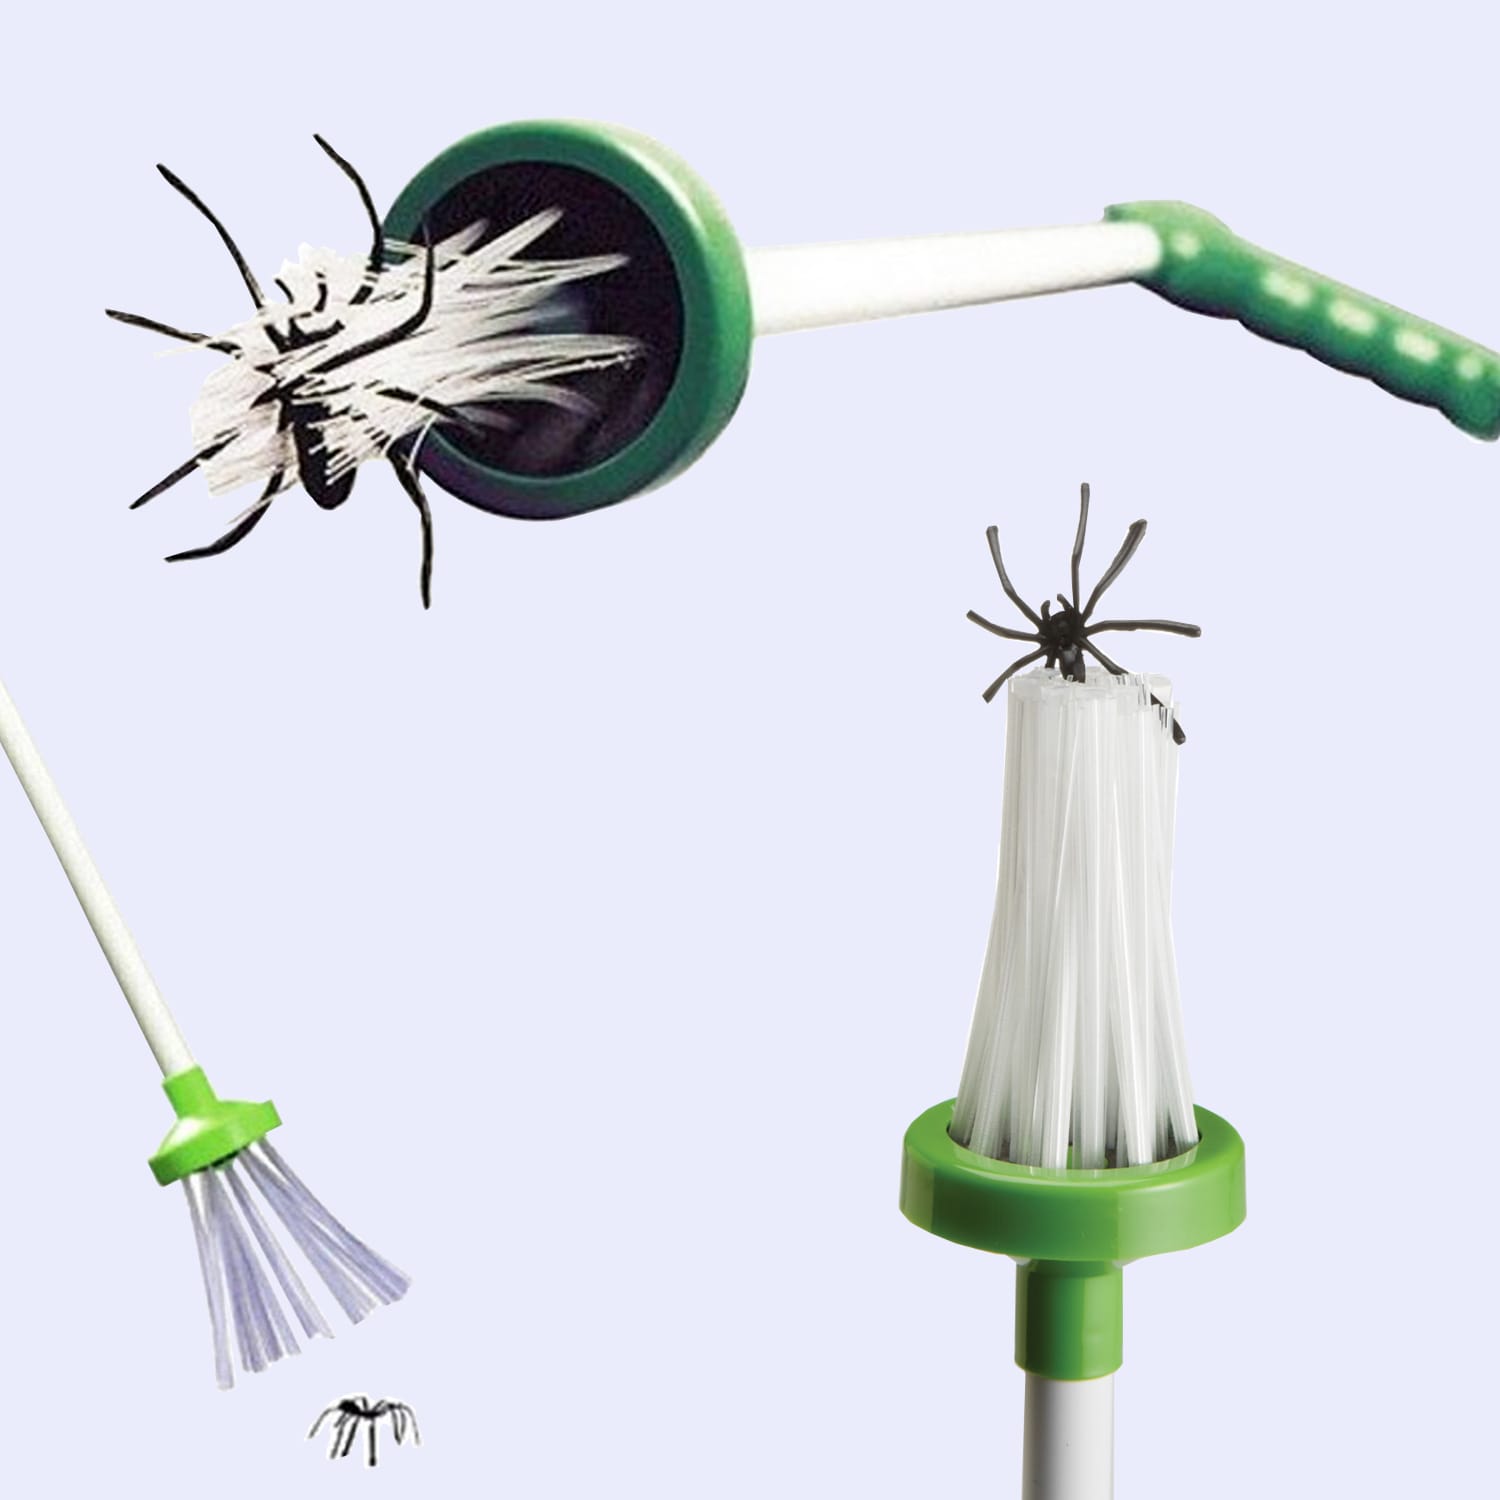 This Humane Spider Catcher is the Perfect Tool for Arachnophobic Pacifists